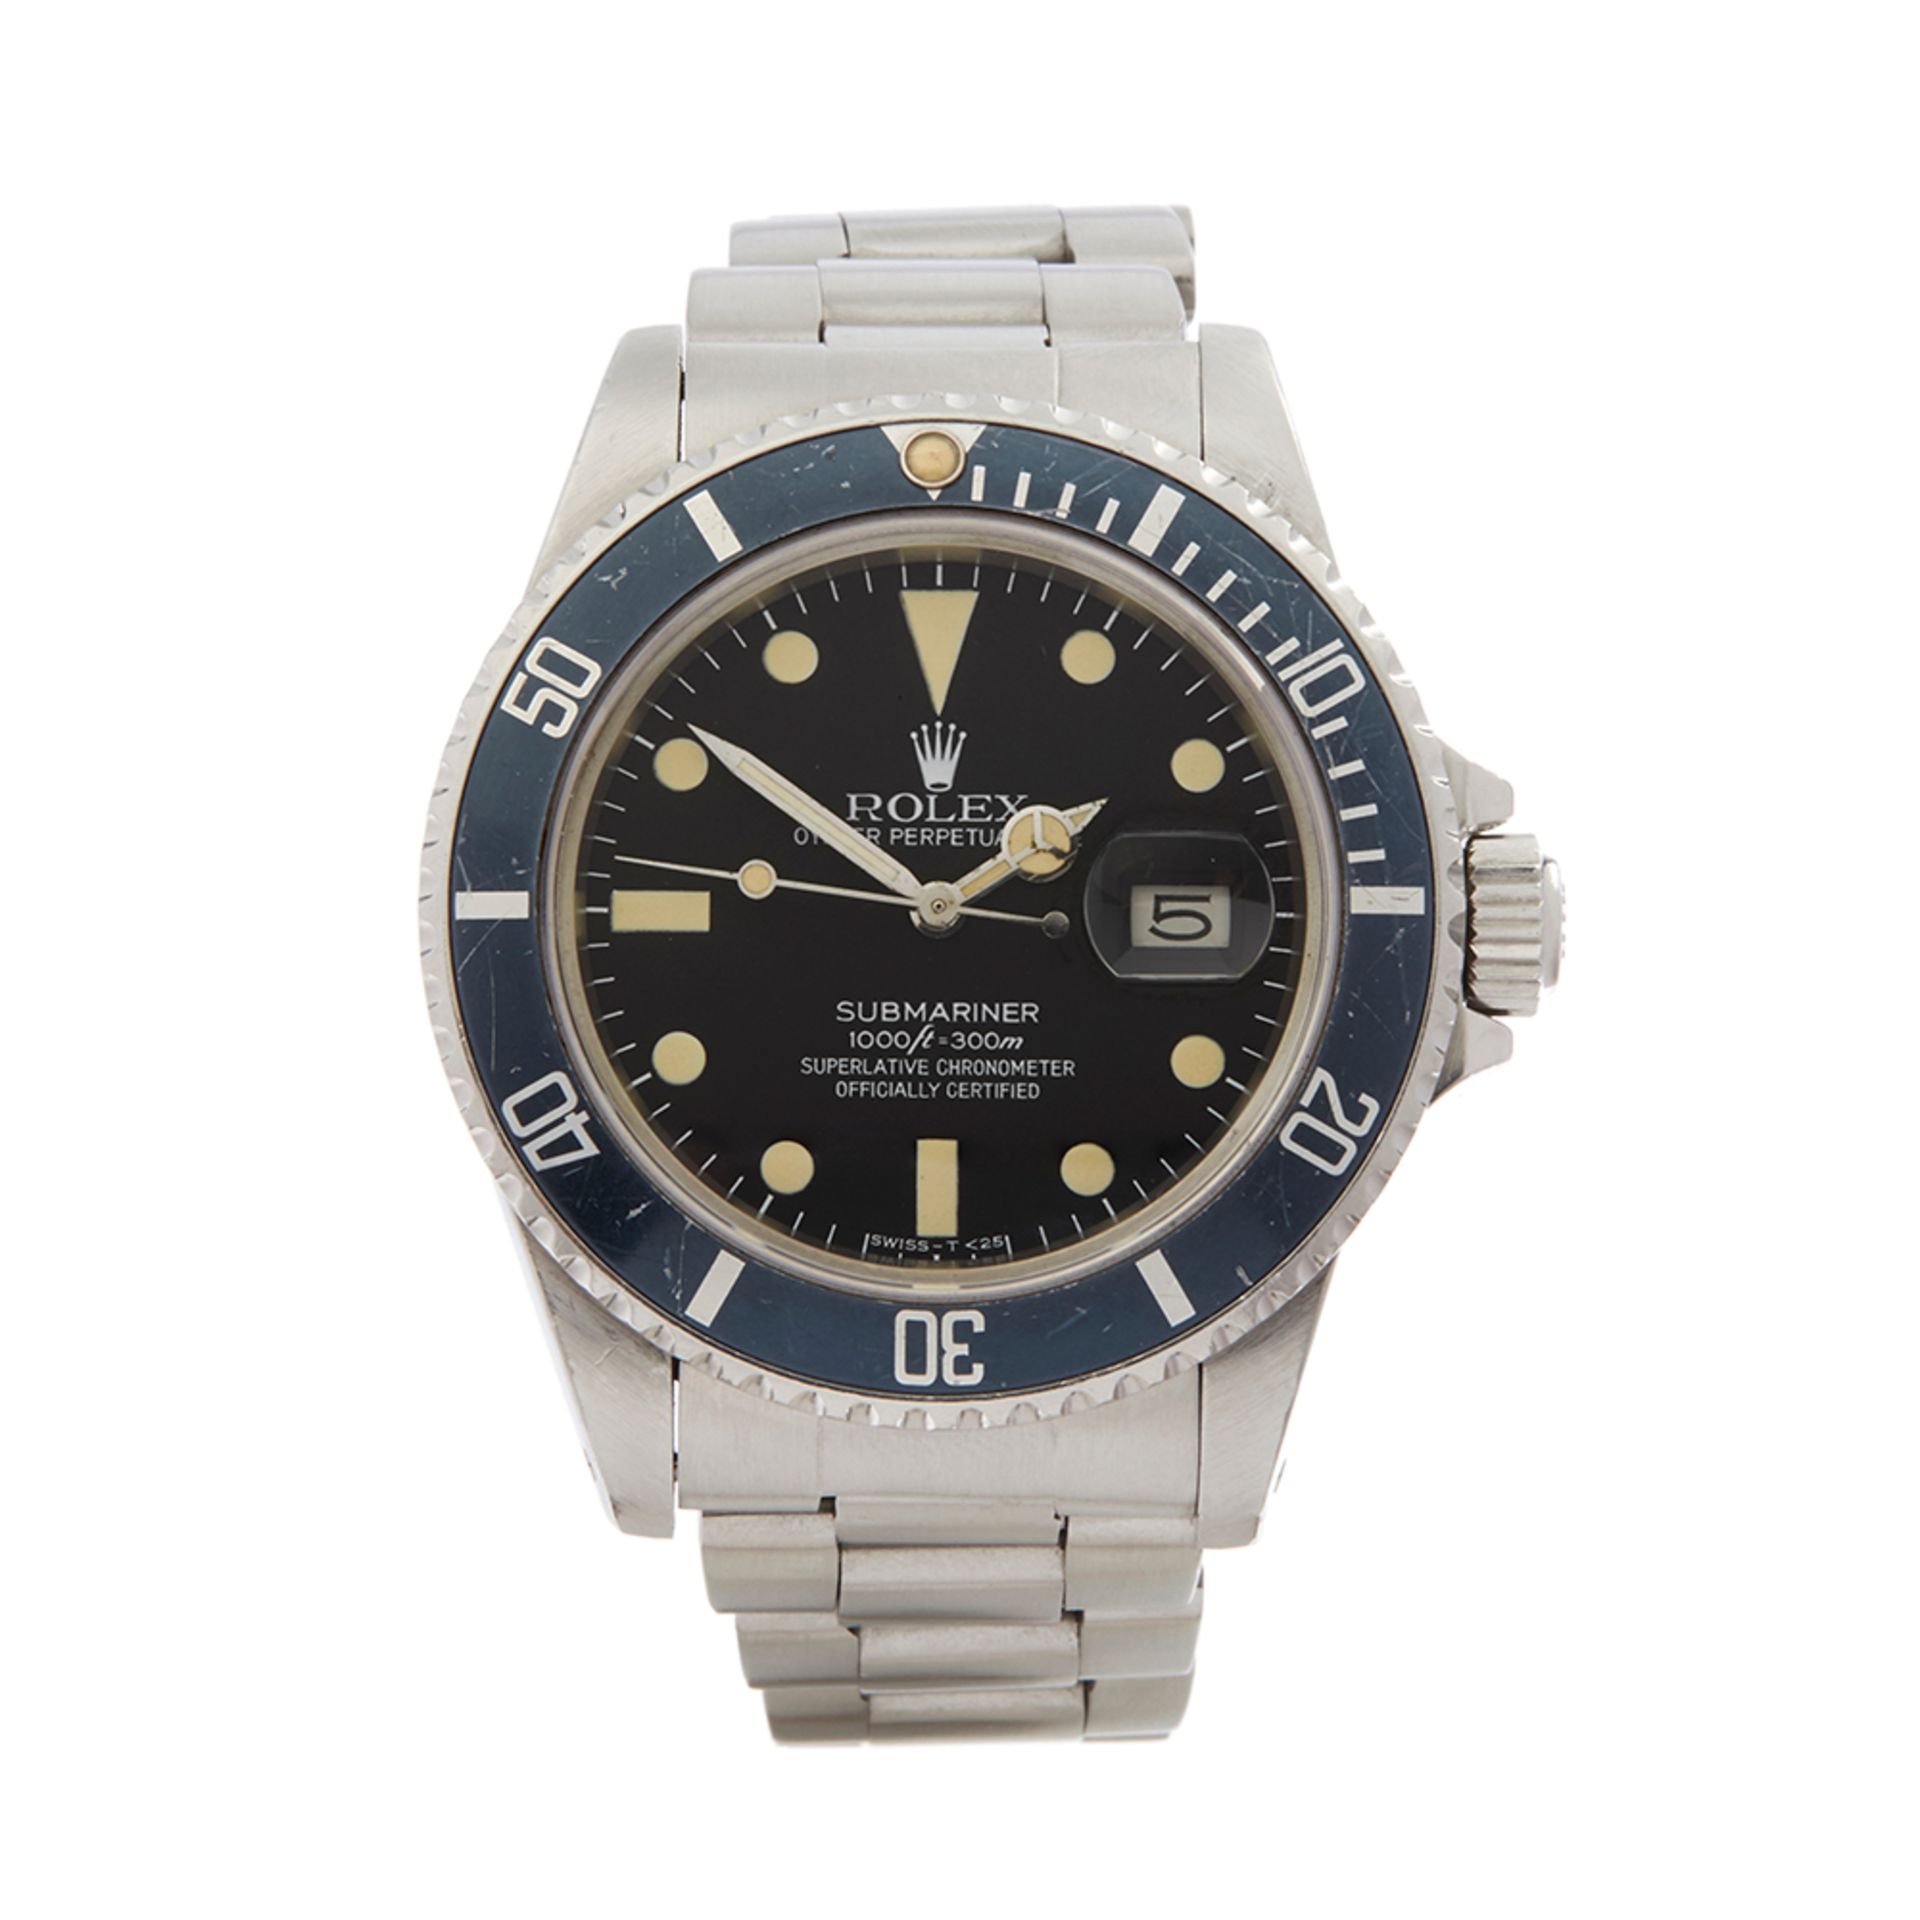 Submariner Stainless Steel - 16800 - Image 2 of 7